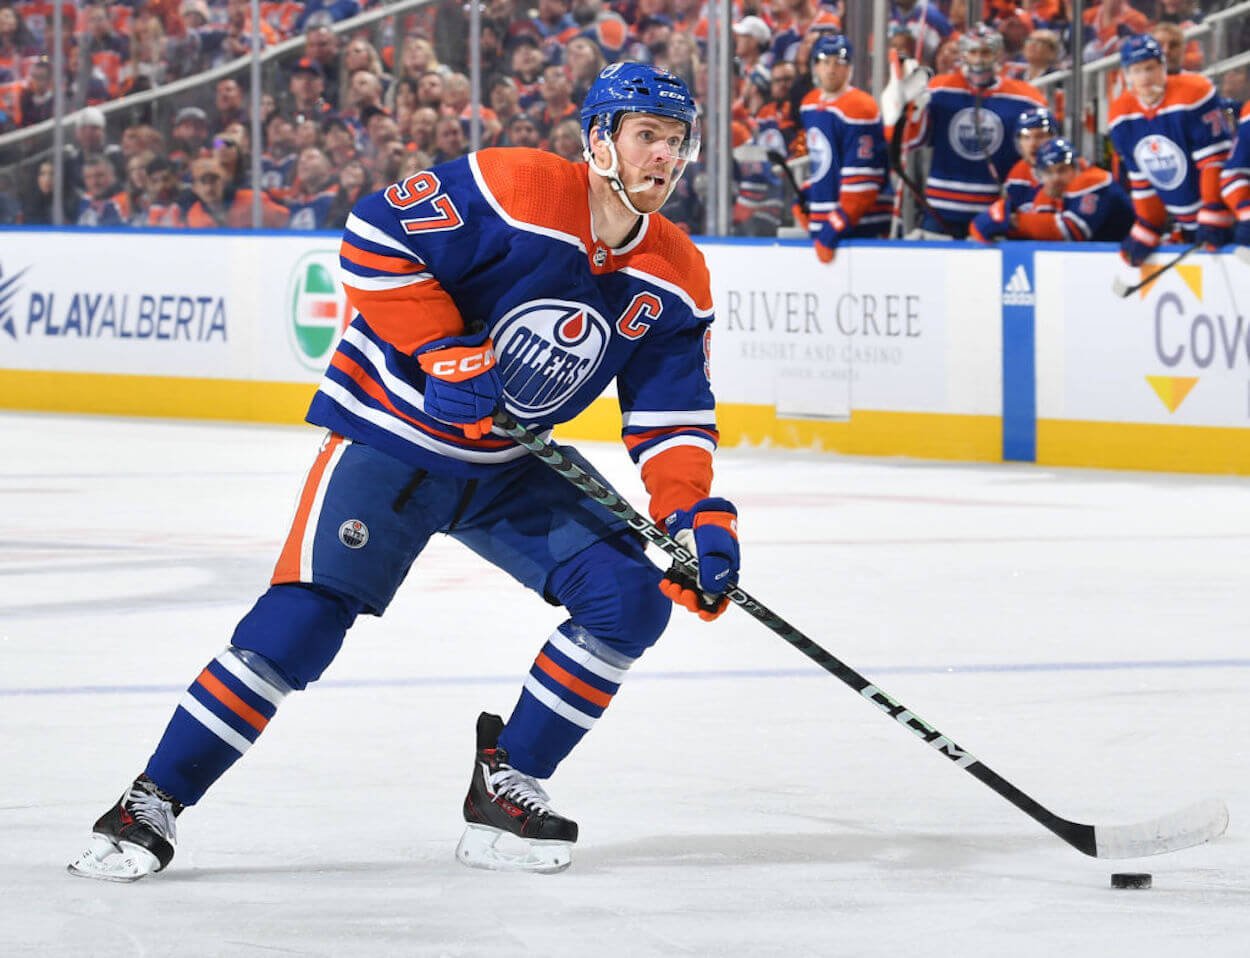 Connor McDavid on the ice for the Edmonton Oilers.